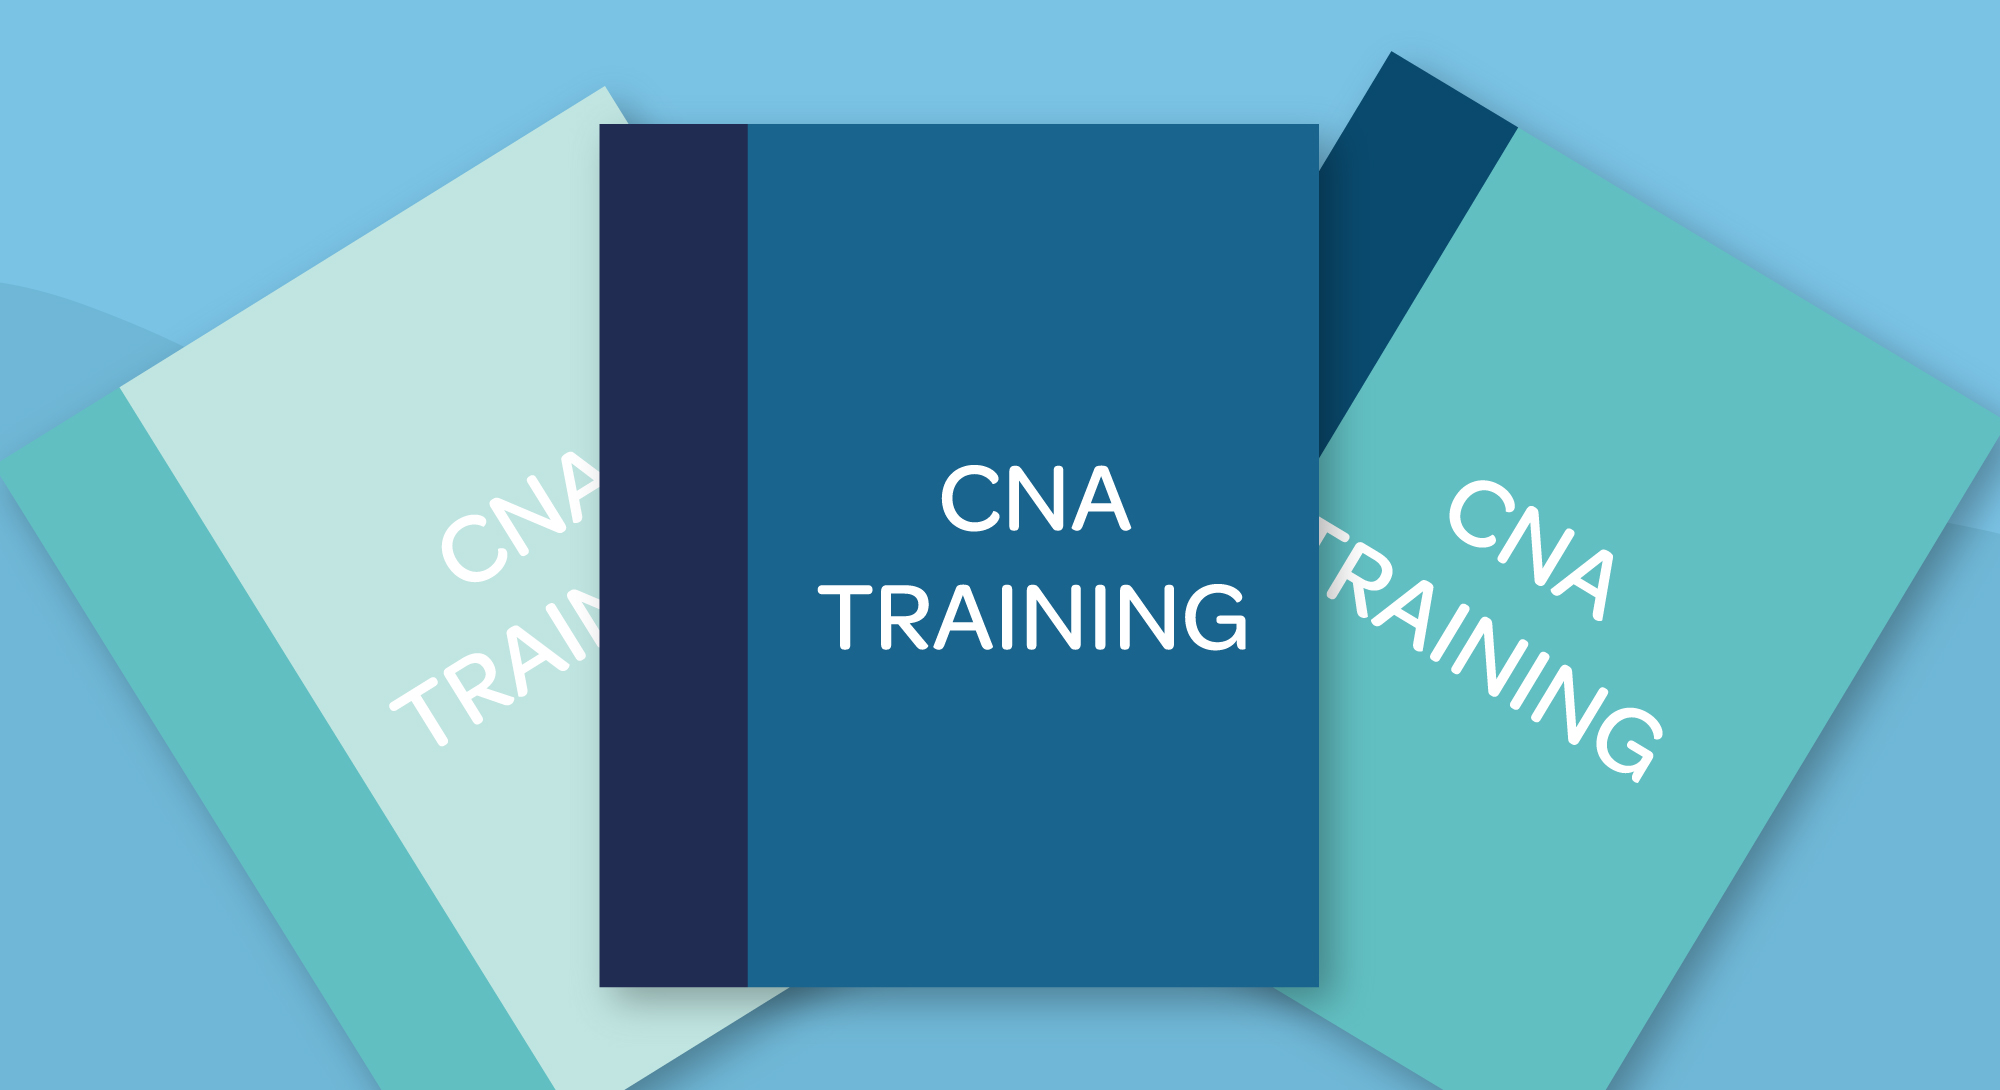 Three illustrated books with the title of "CNA TRAINING"